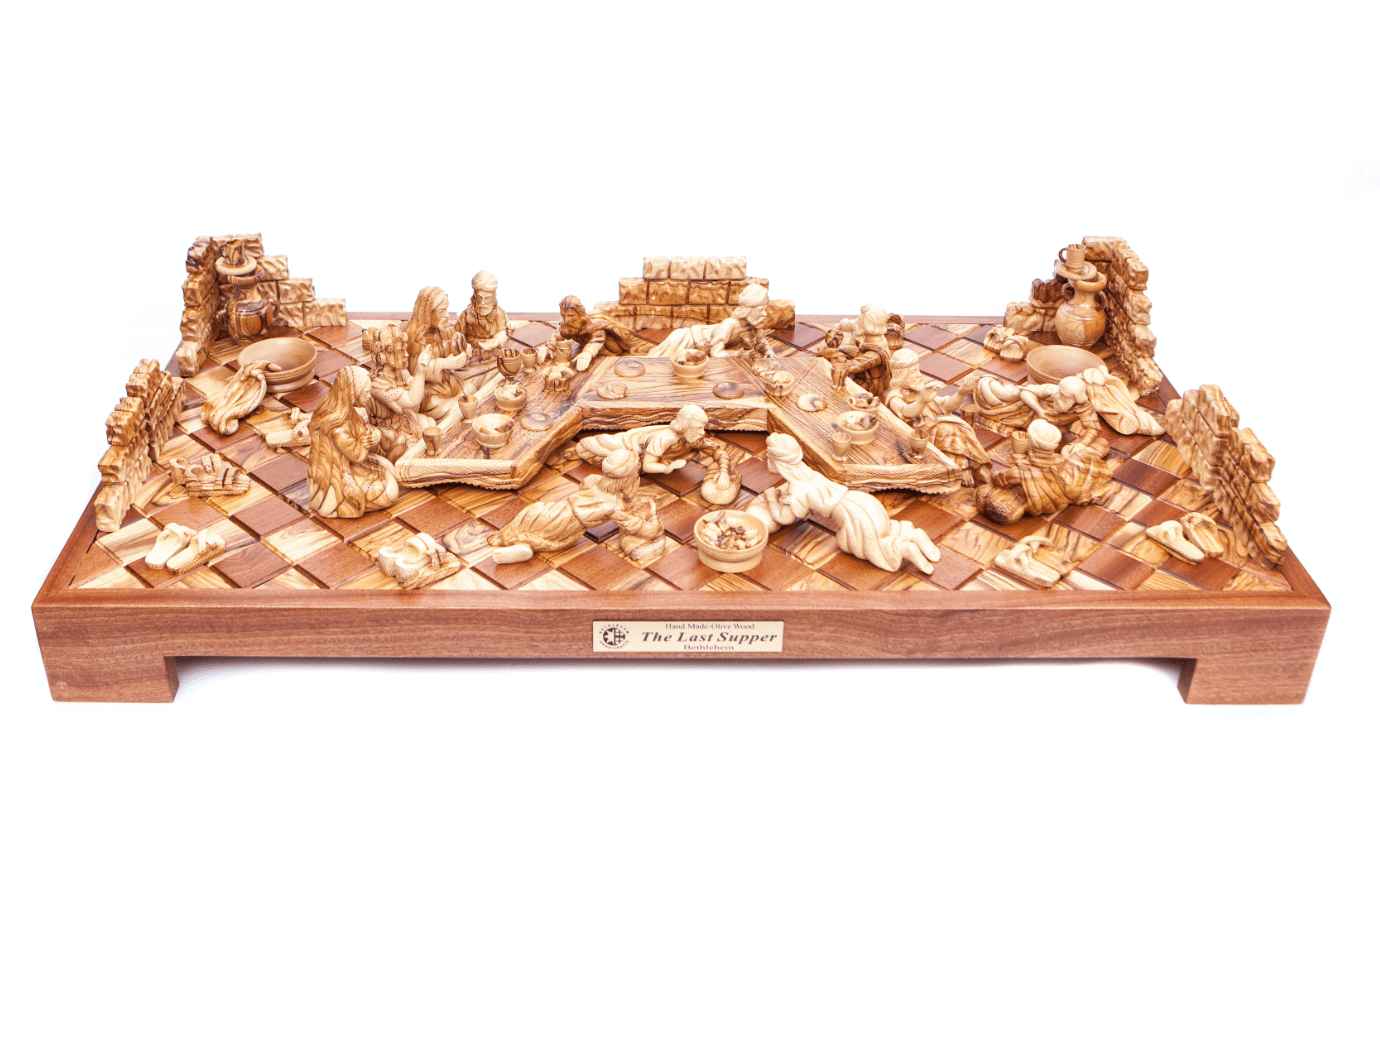 Large Last Supper Masterpiece Wood Carving, Sculptured from Olive Wood in the Holy Land, Unique Carved Image of Jesus Christ and his Disciples Celebrating the Passover, Biblical Inspired Art for Home